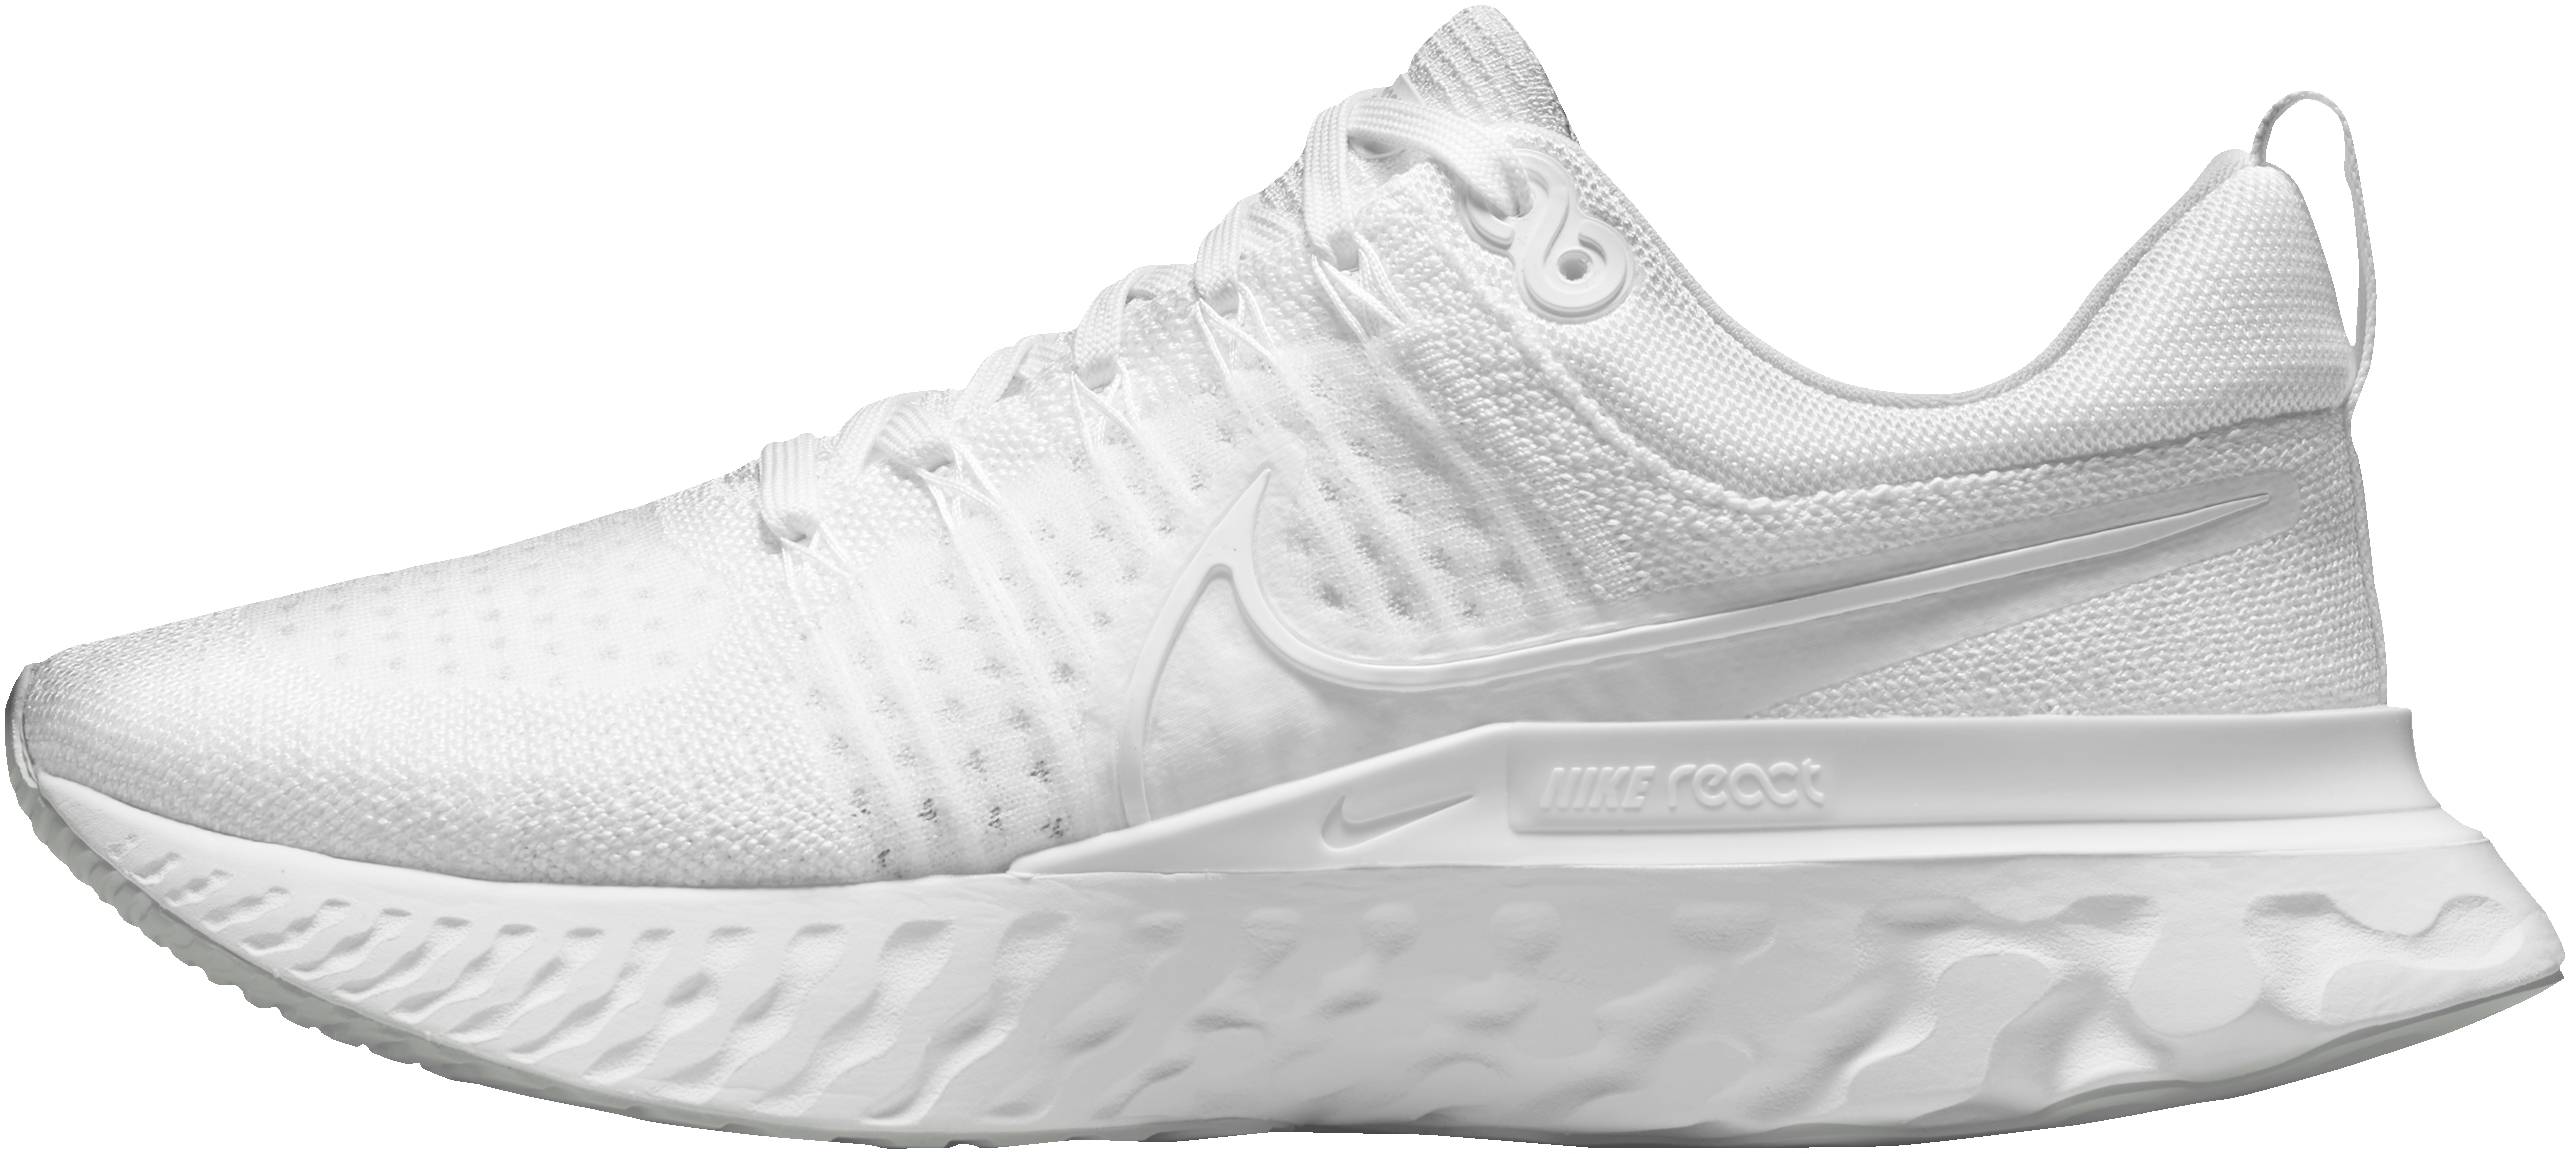 white running shoes